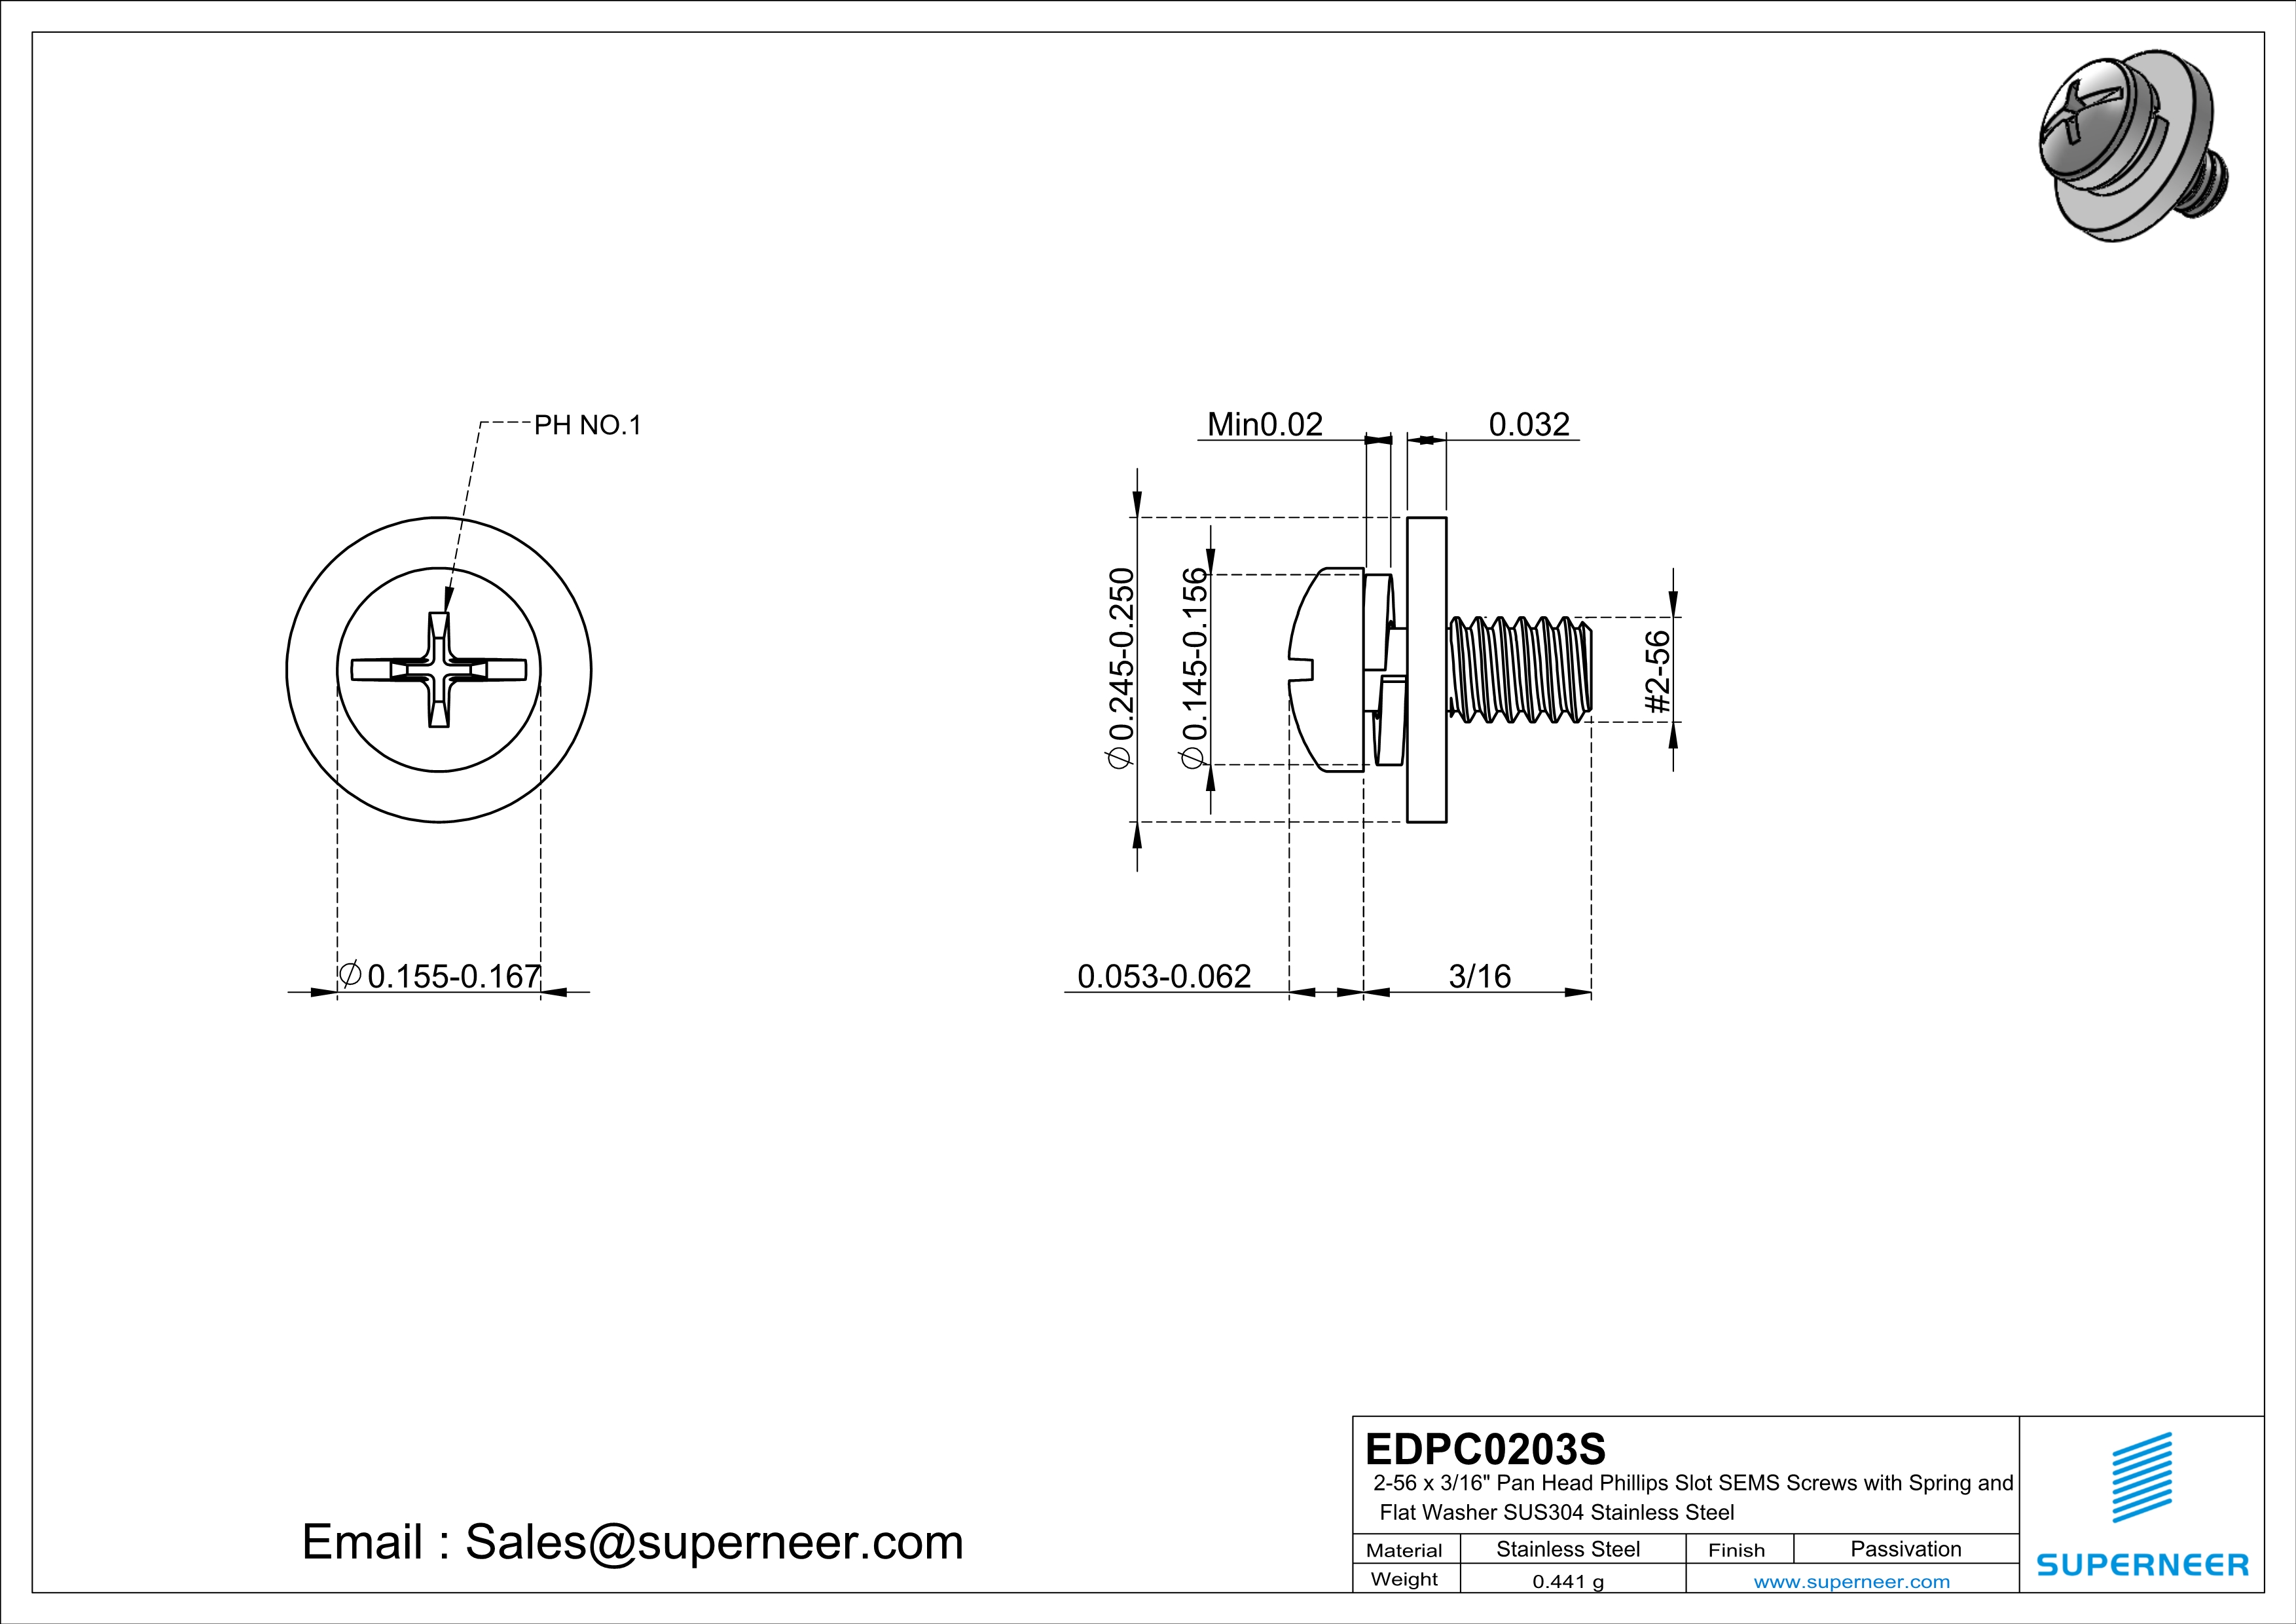 2-56 x 3/16" Pan Head Phillips Slot SEMS Screws with Spring and Flat Washer SUS304 Stainless Steel Inox